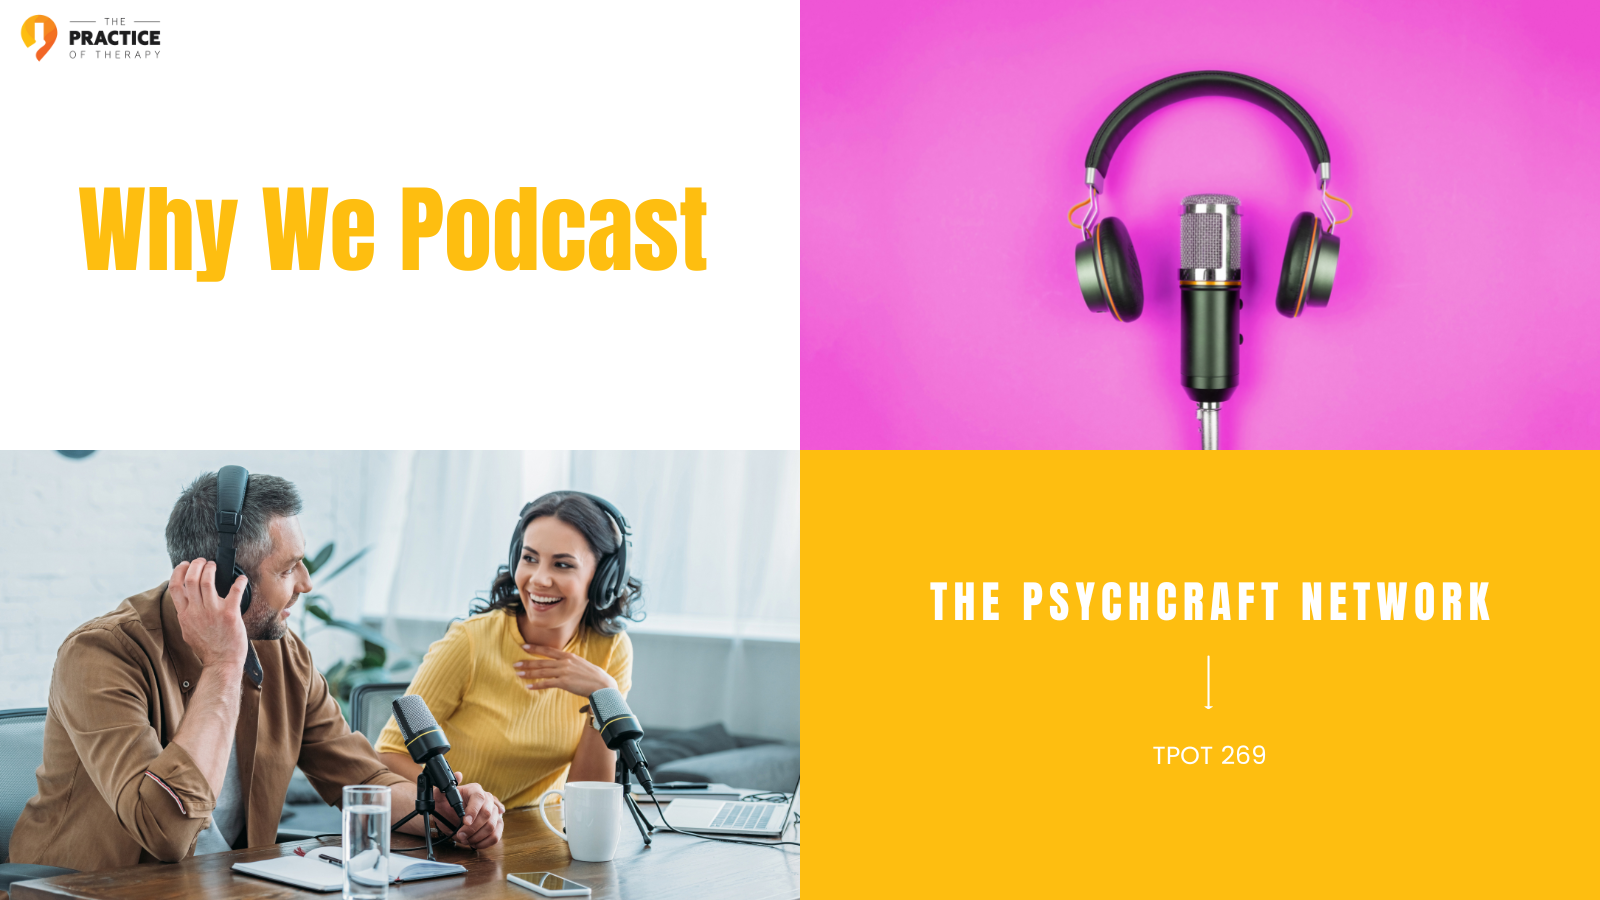 The PsychCraft Network Why We Podcast TPOT 269